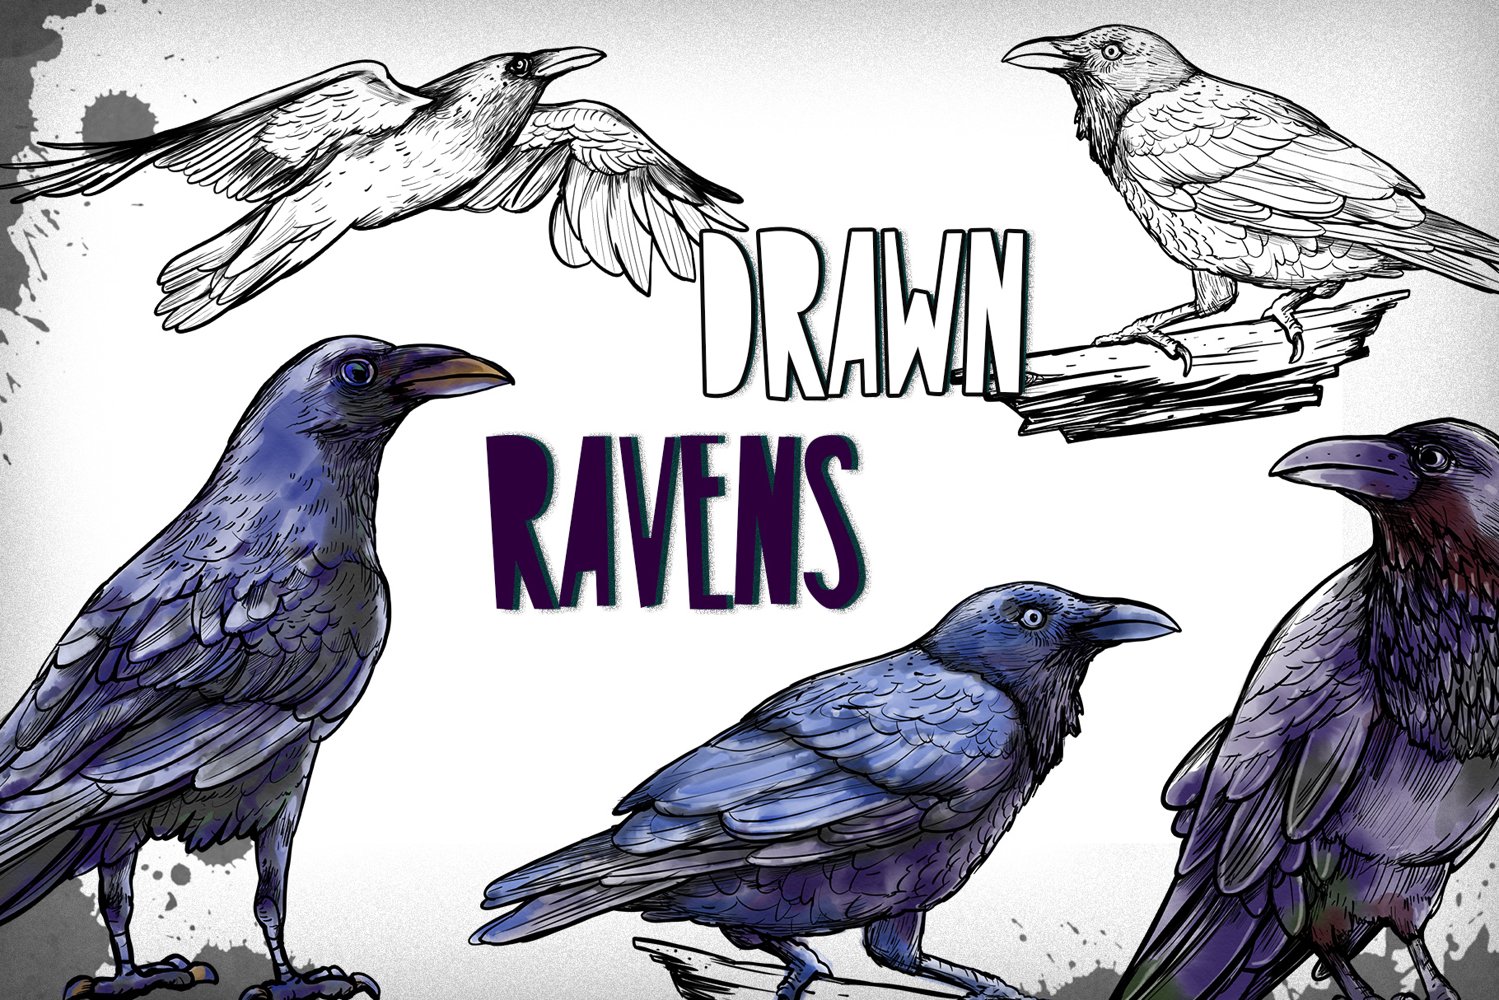 Cover image of Drawn Ravens.